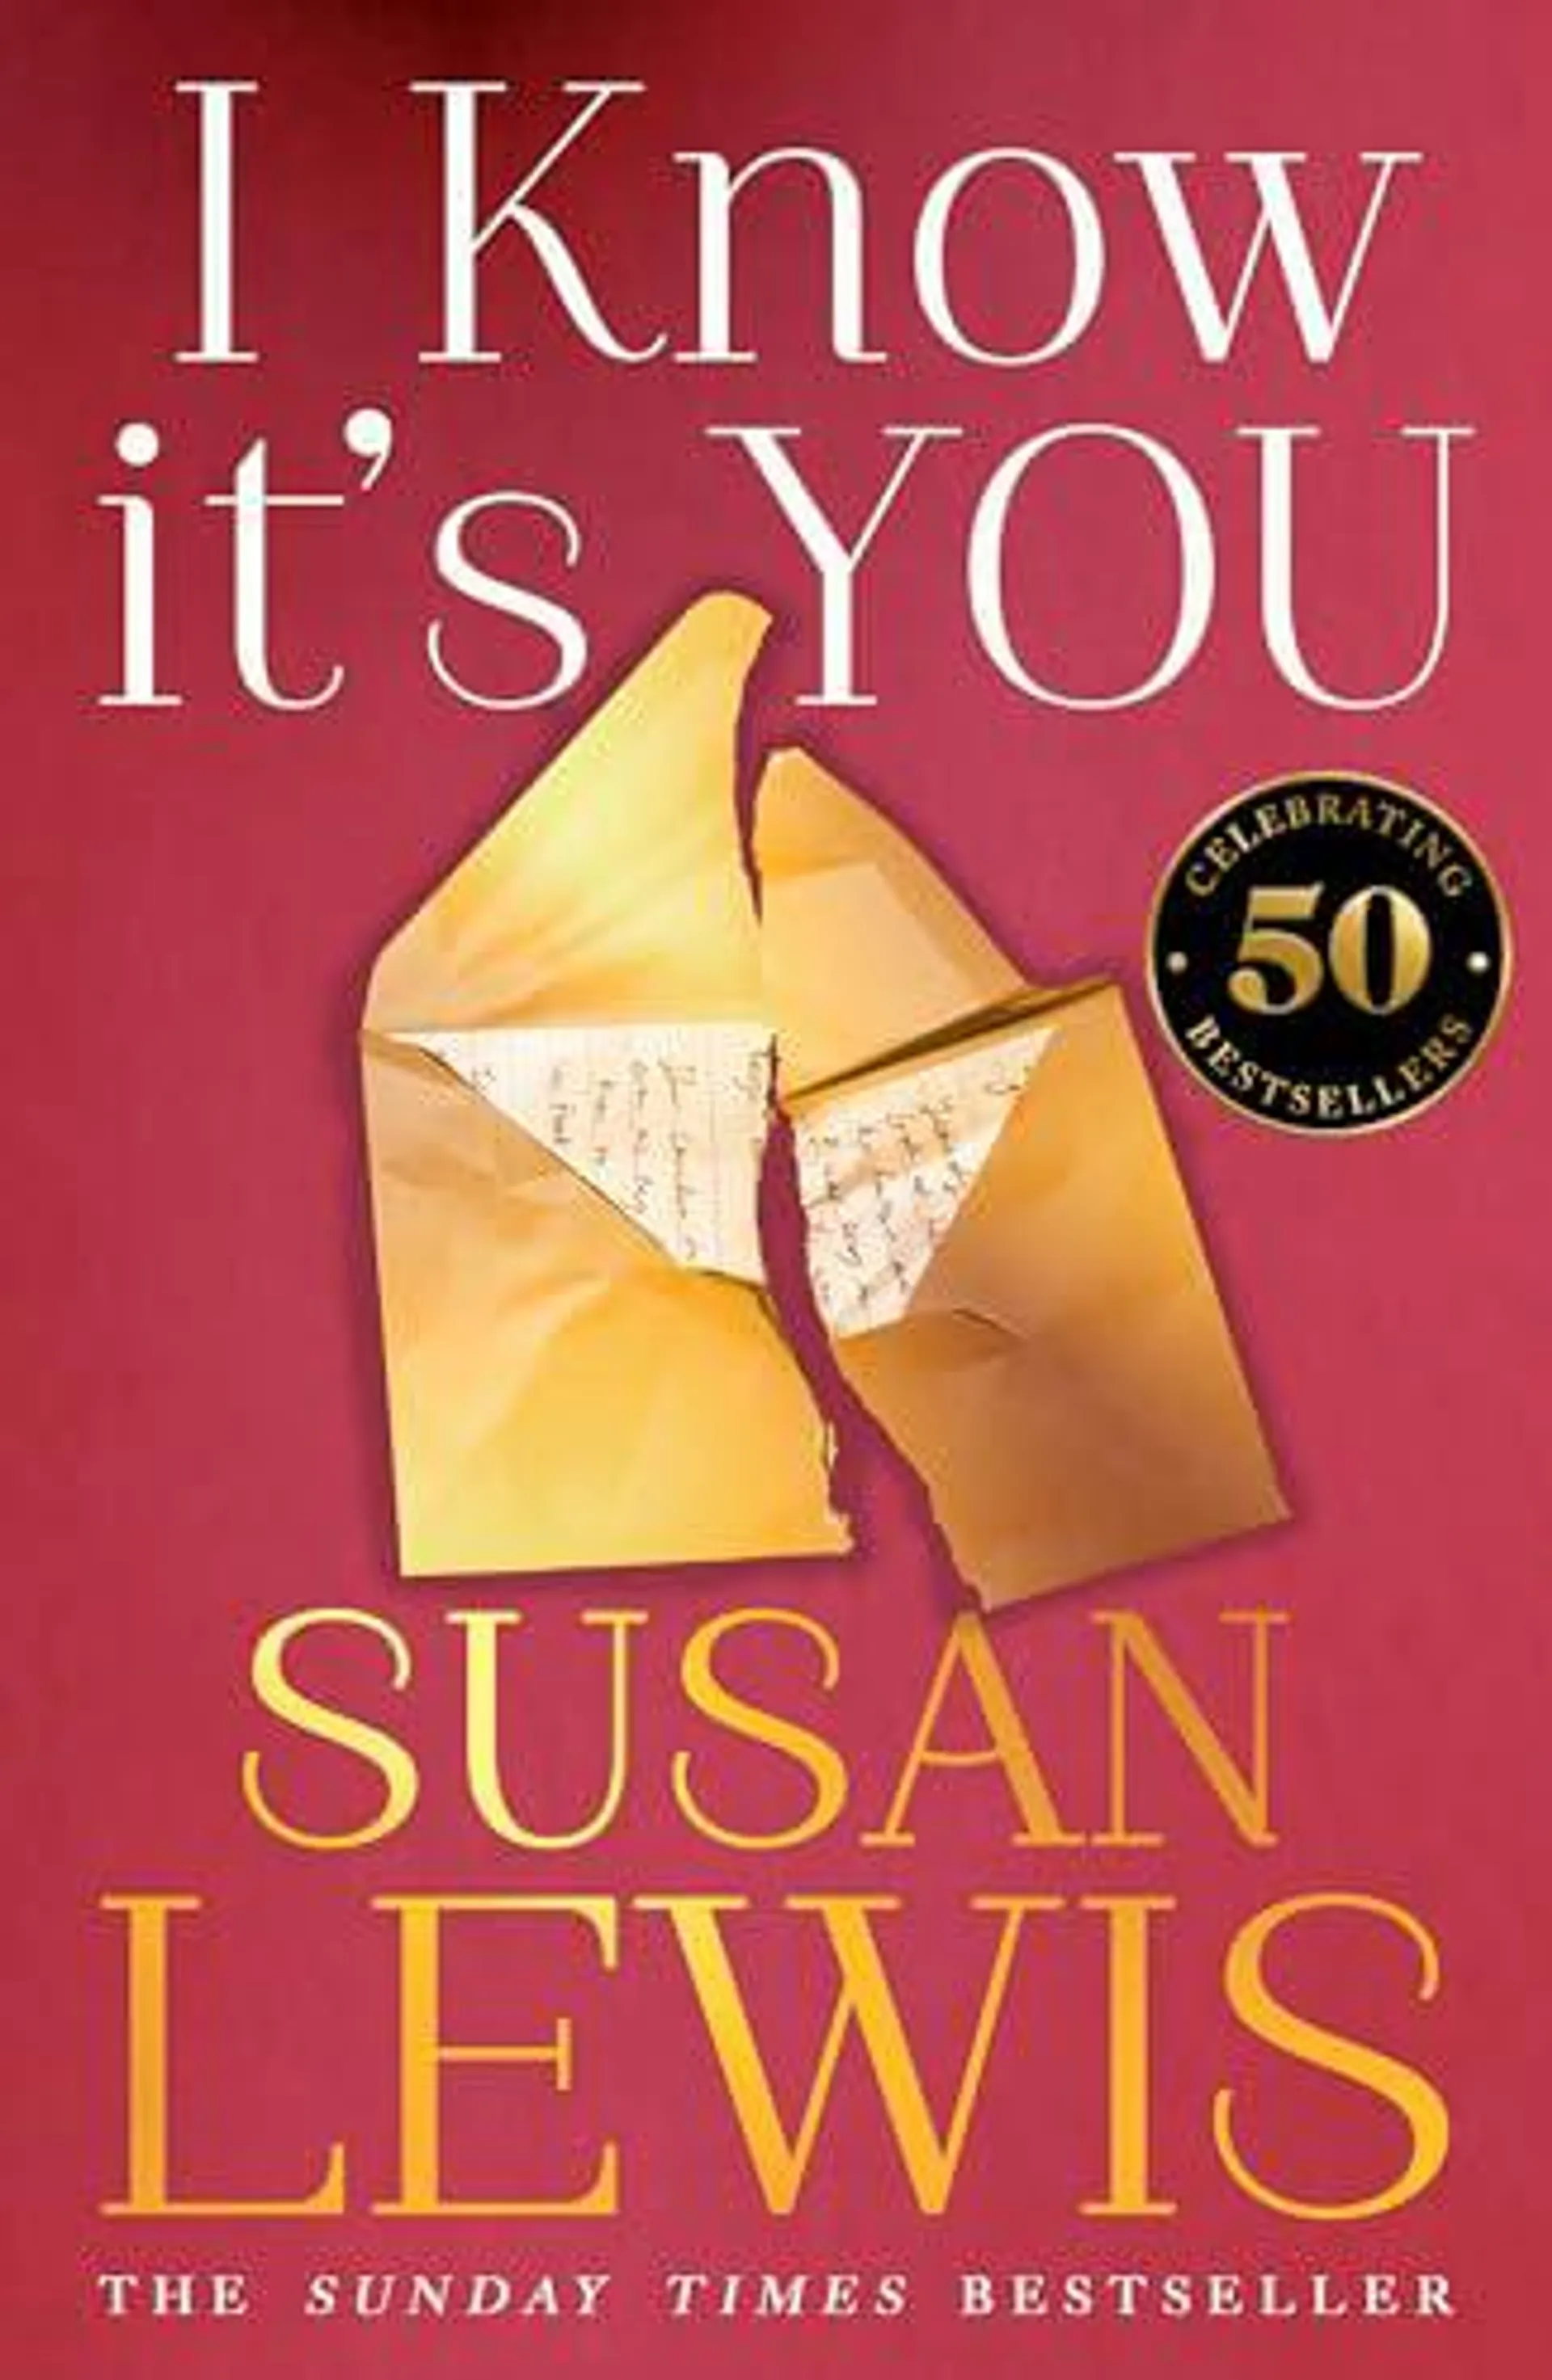 I Know It's You by Susan Lewis